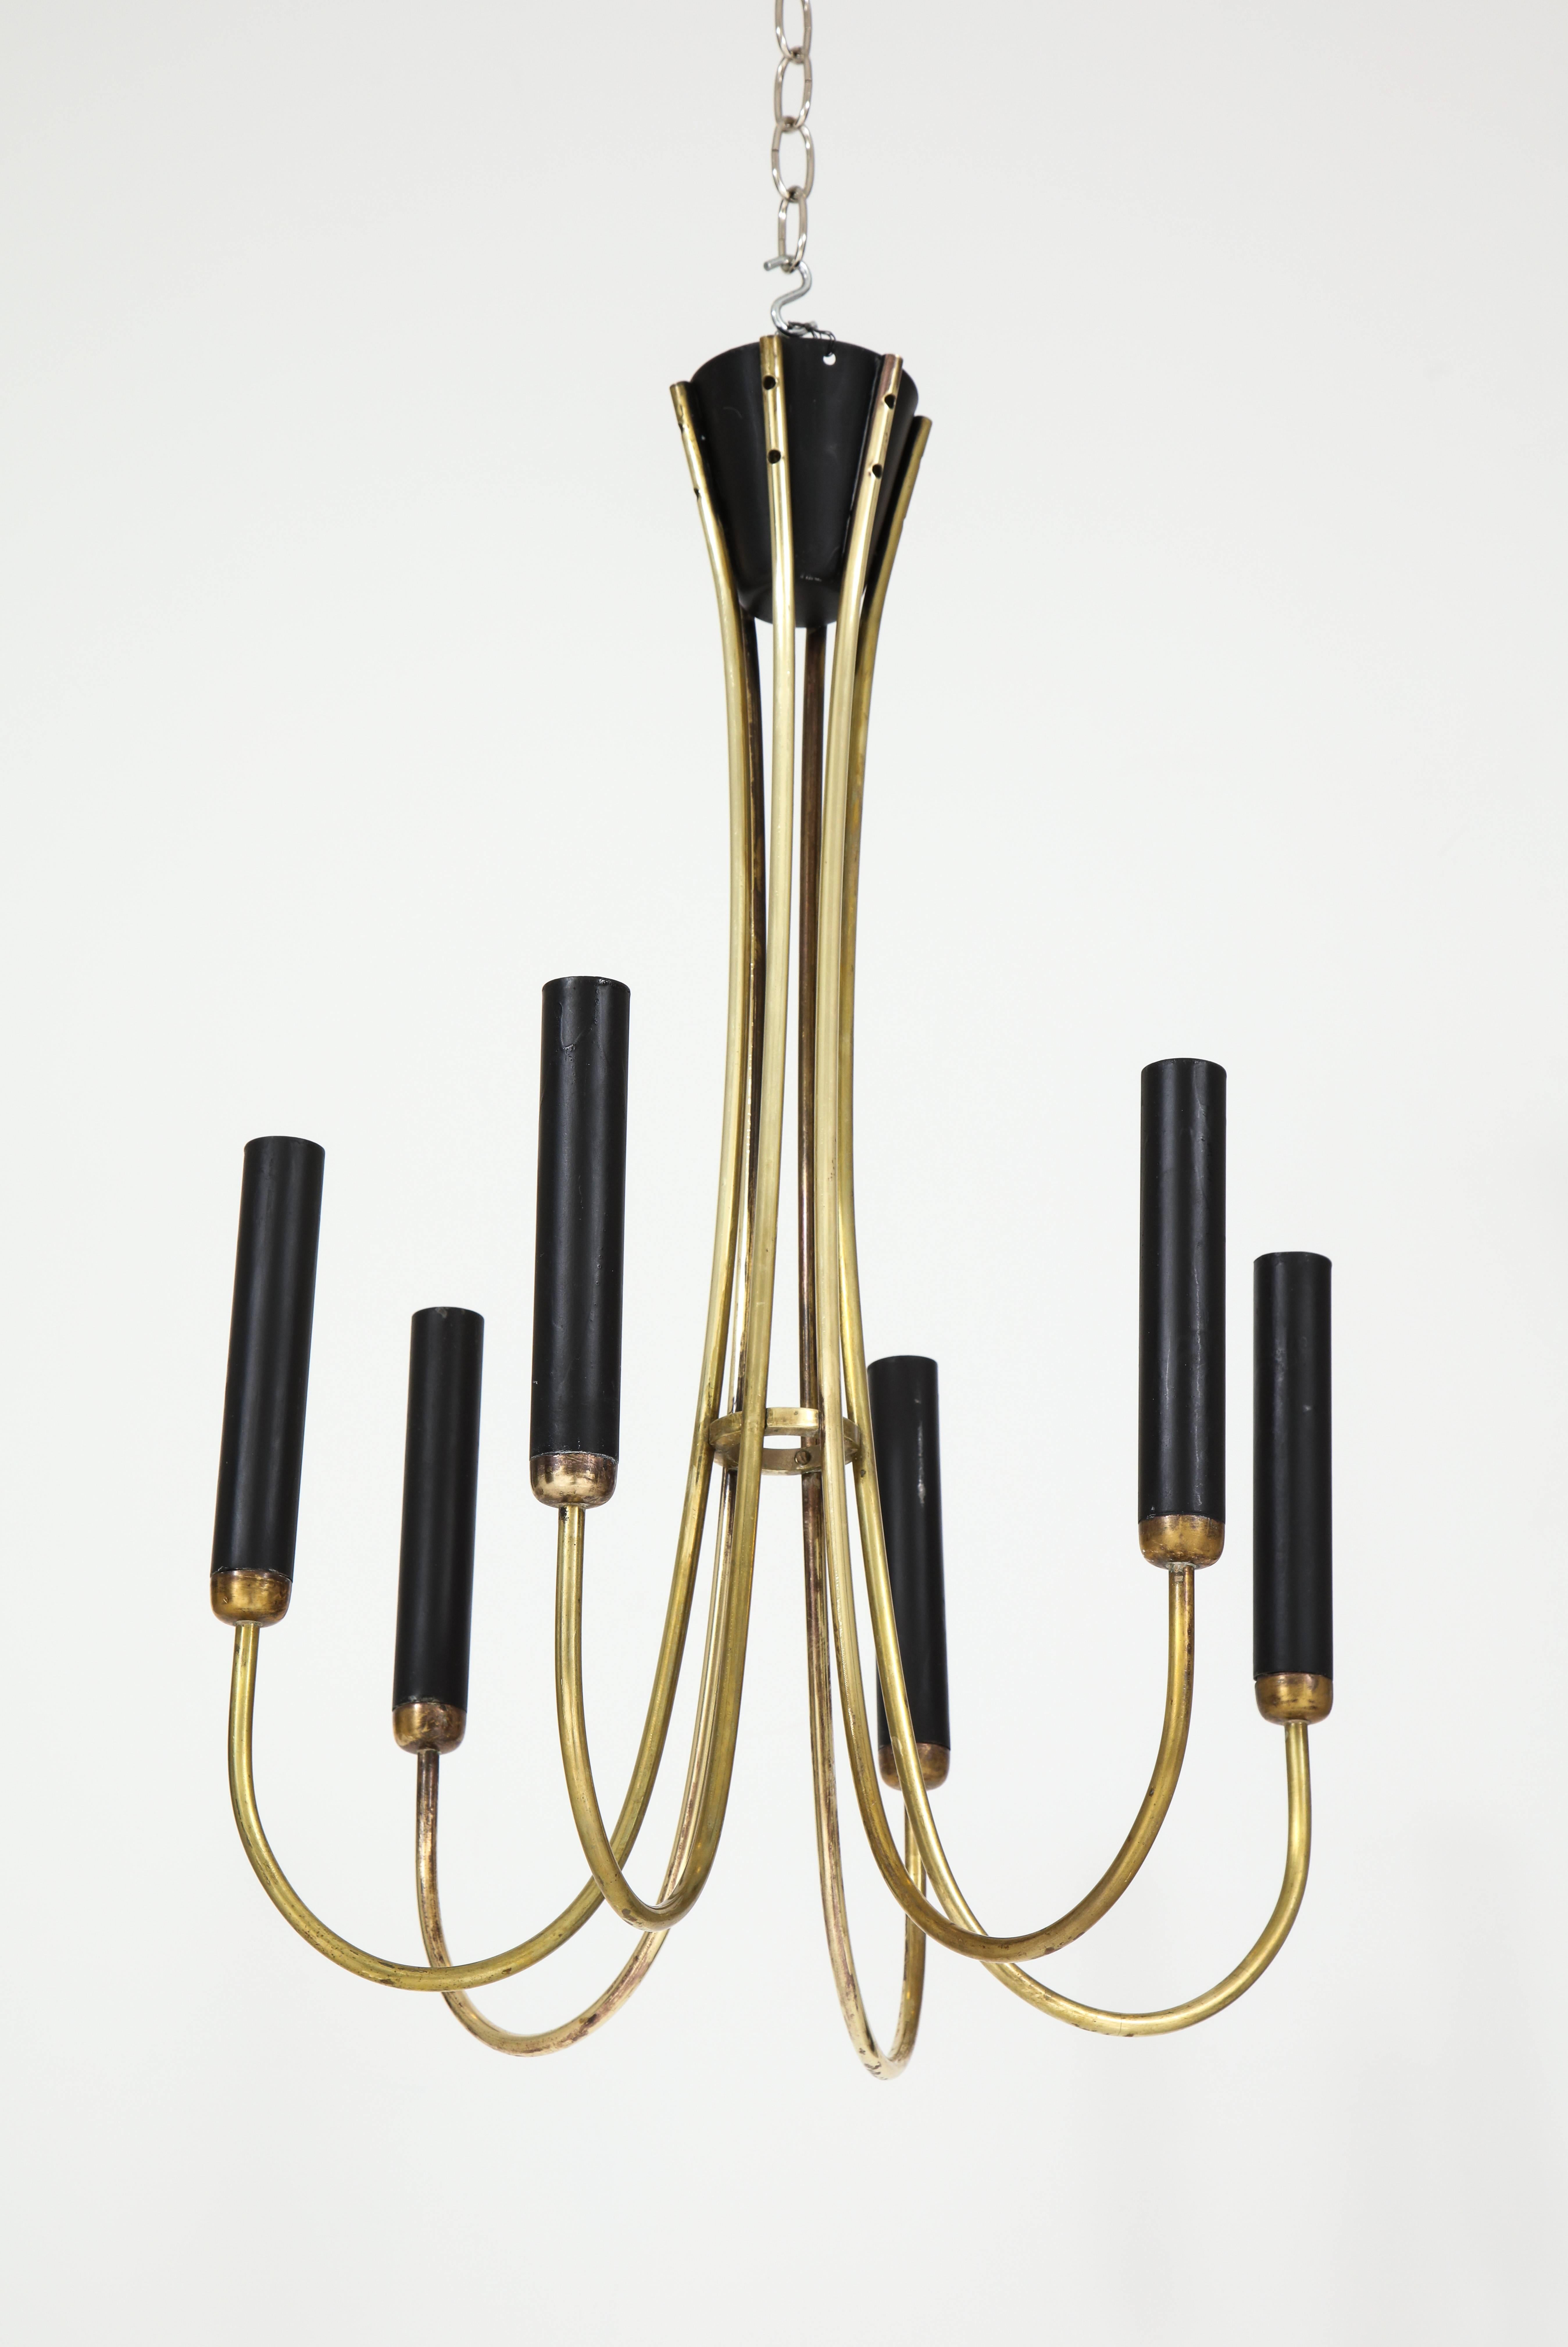 An Italian 1970s brass chandelier having six arms with black metal tubular sleeves,
Italy, circa 1970.
Size: 28